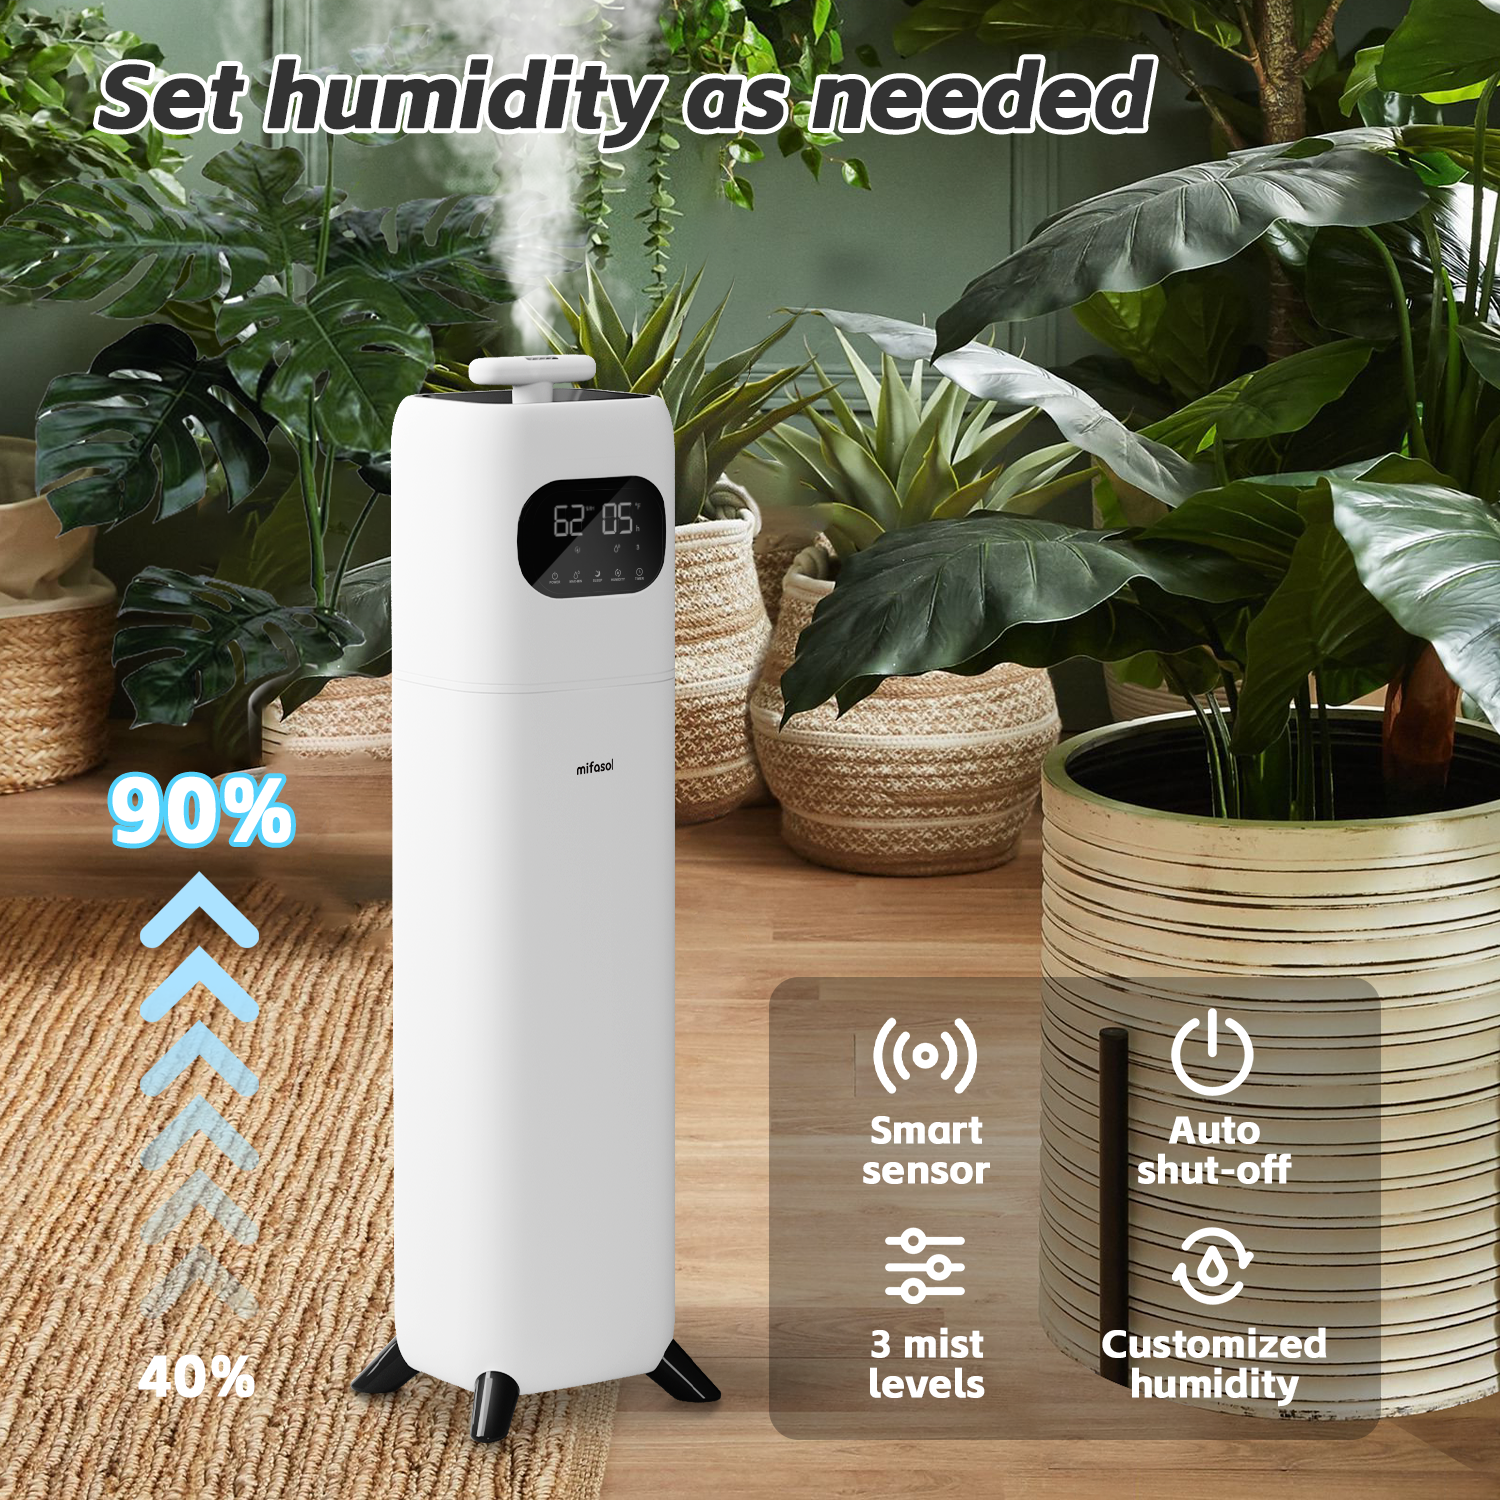 [LCD-2102]2.3gal/9LHumidifiers for Bedroom Large Room, Quiet Humidifiers for Bedroom with Timer, 360°Nozzle, Aroma Box, 3 Speed Ultrasonic Cool Mist Humidifier with Humidistat for Baby Nursery Yoga Plants